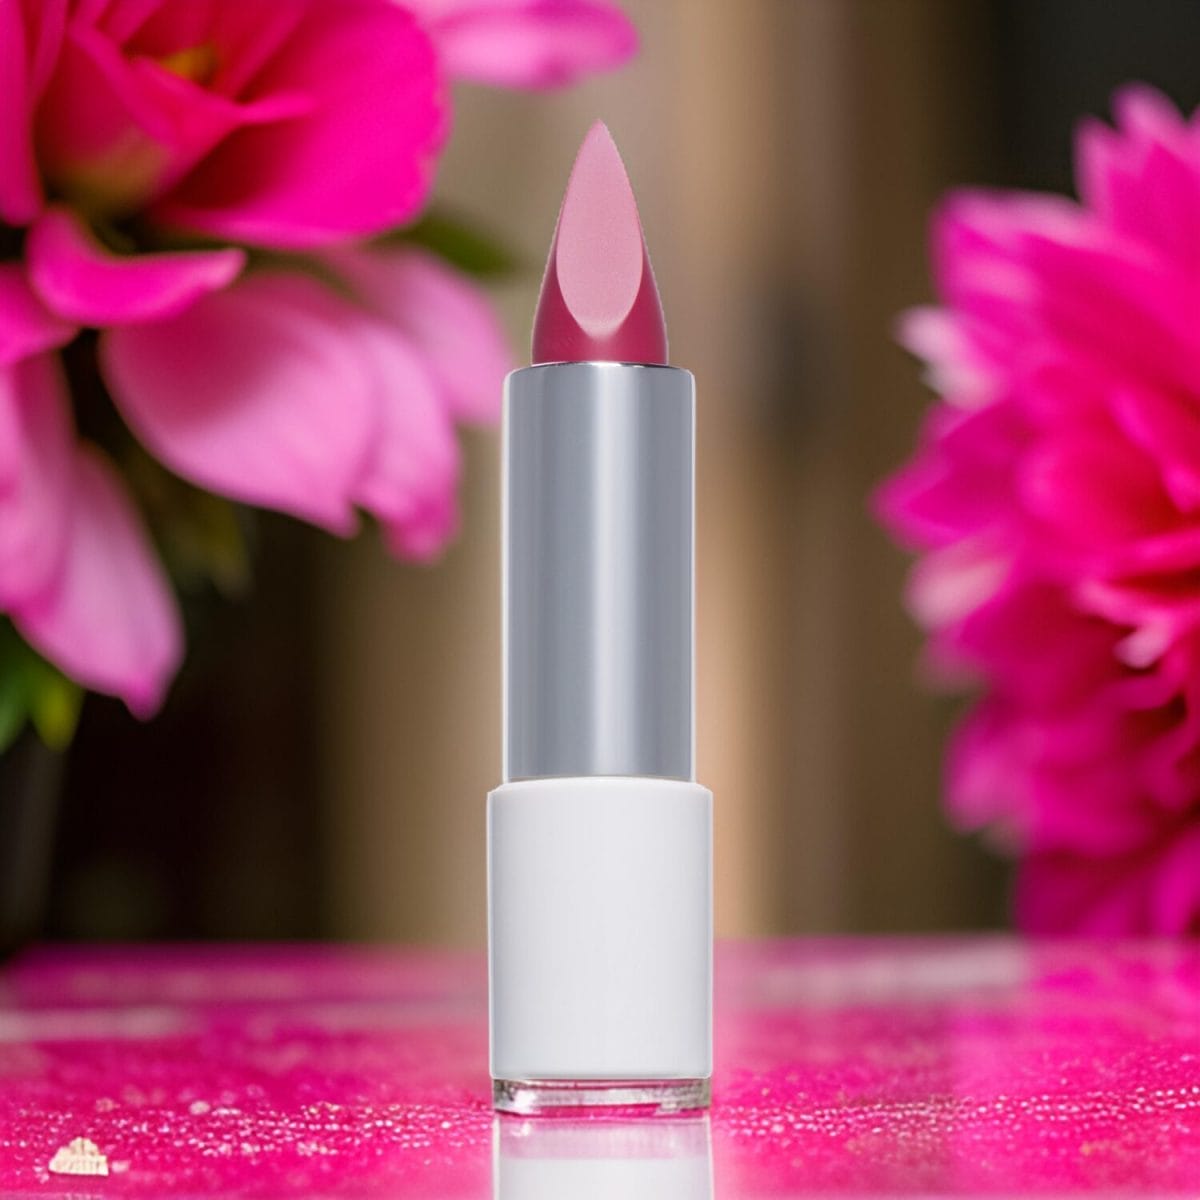 CGI-enhanced lifestyle lipstick edited with Photoshop for a cosmetic marketing image on pink with flowers